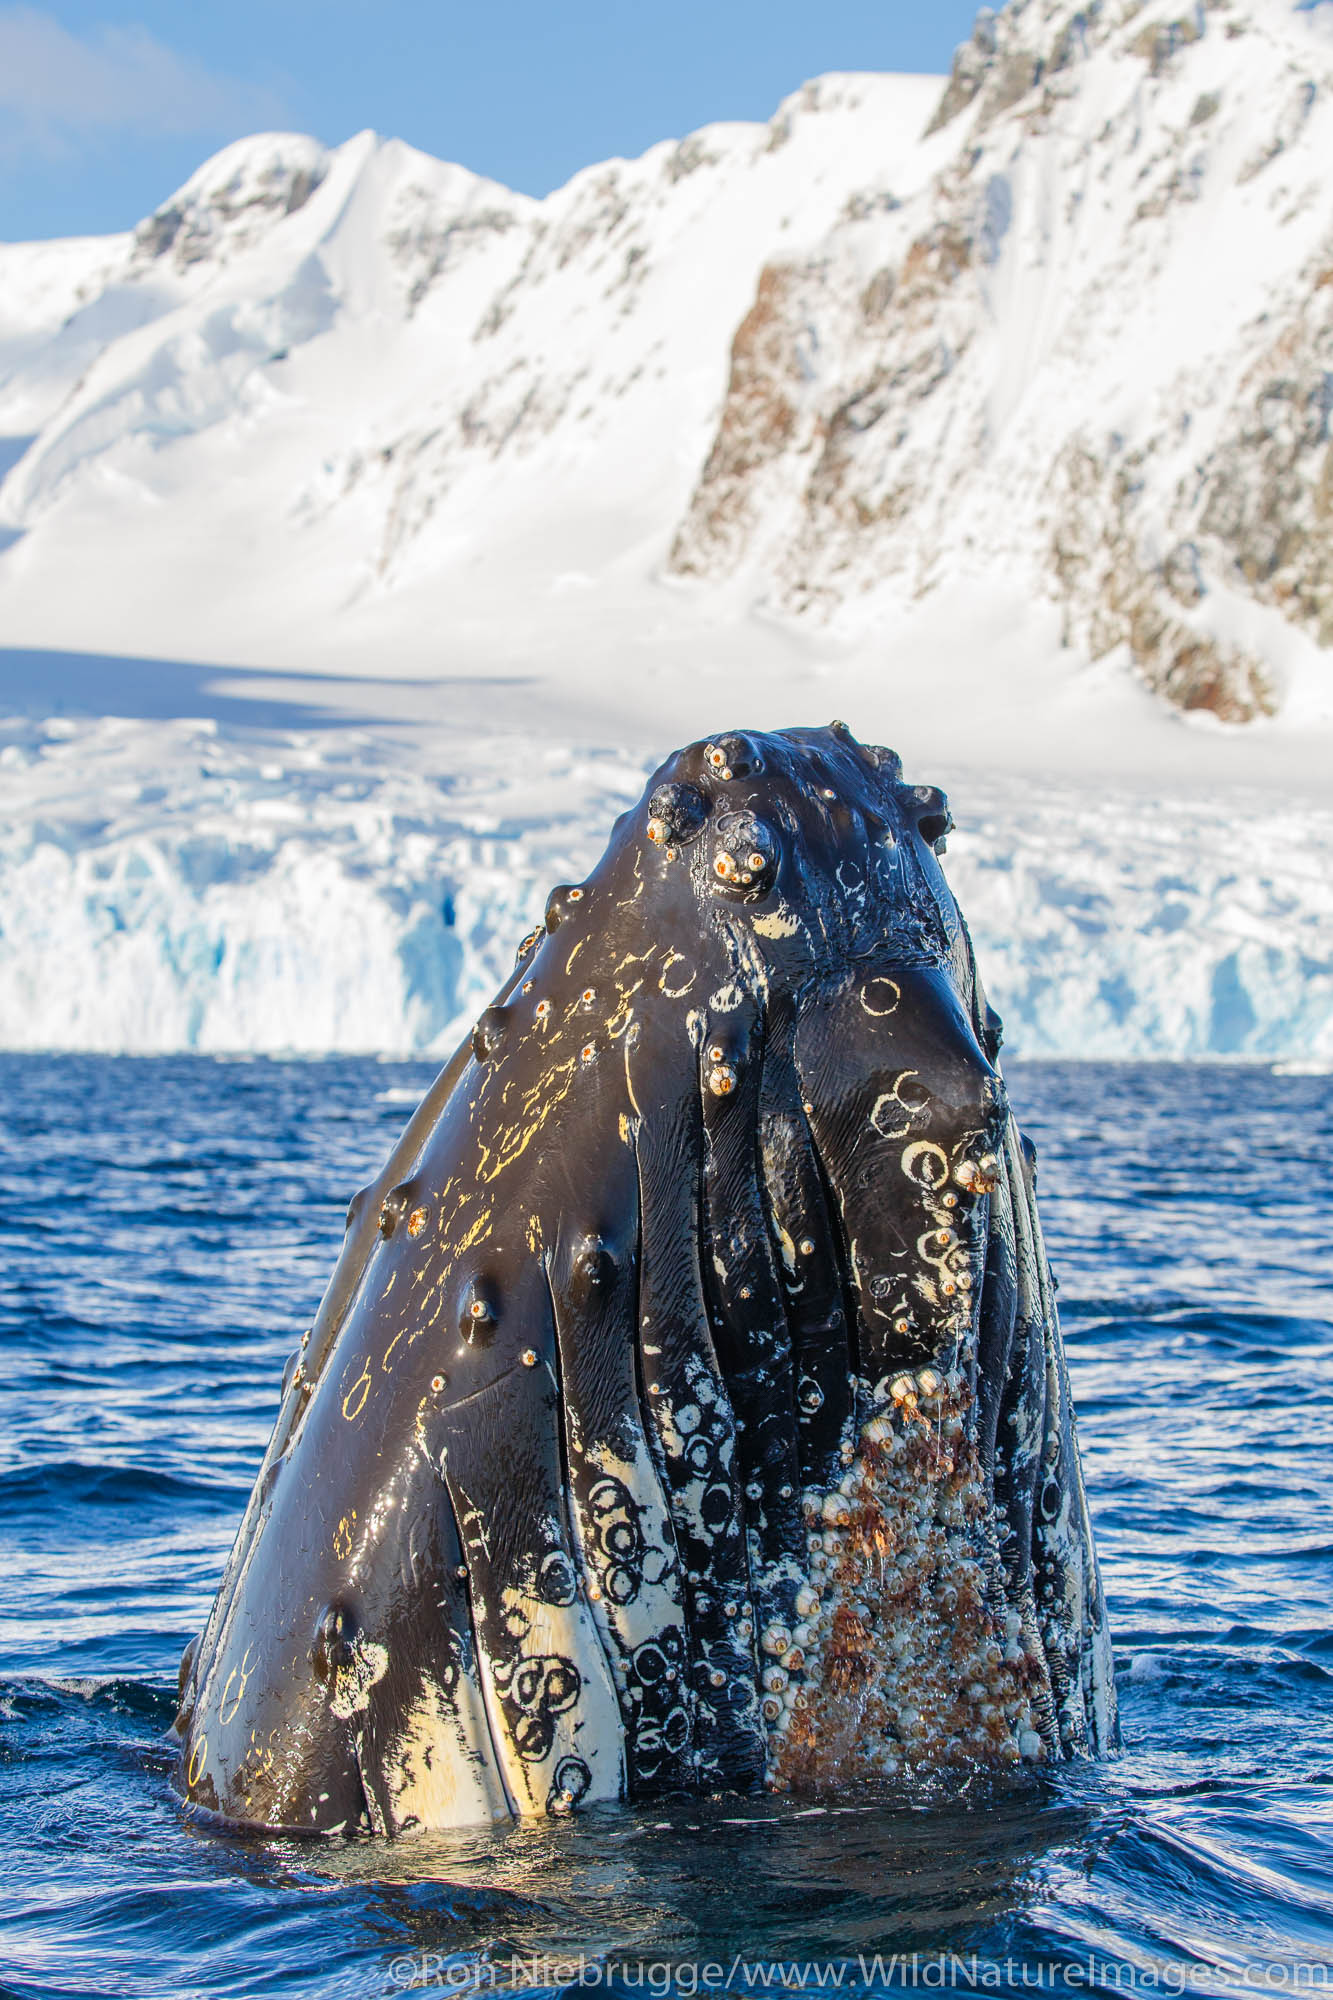 Humpback whales, Lemaire Channel, Antarctica.